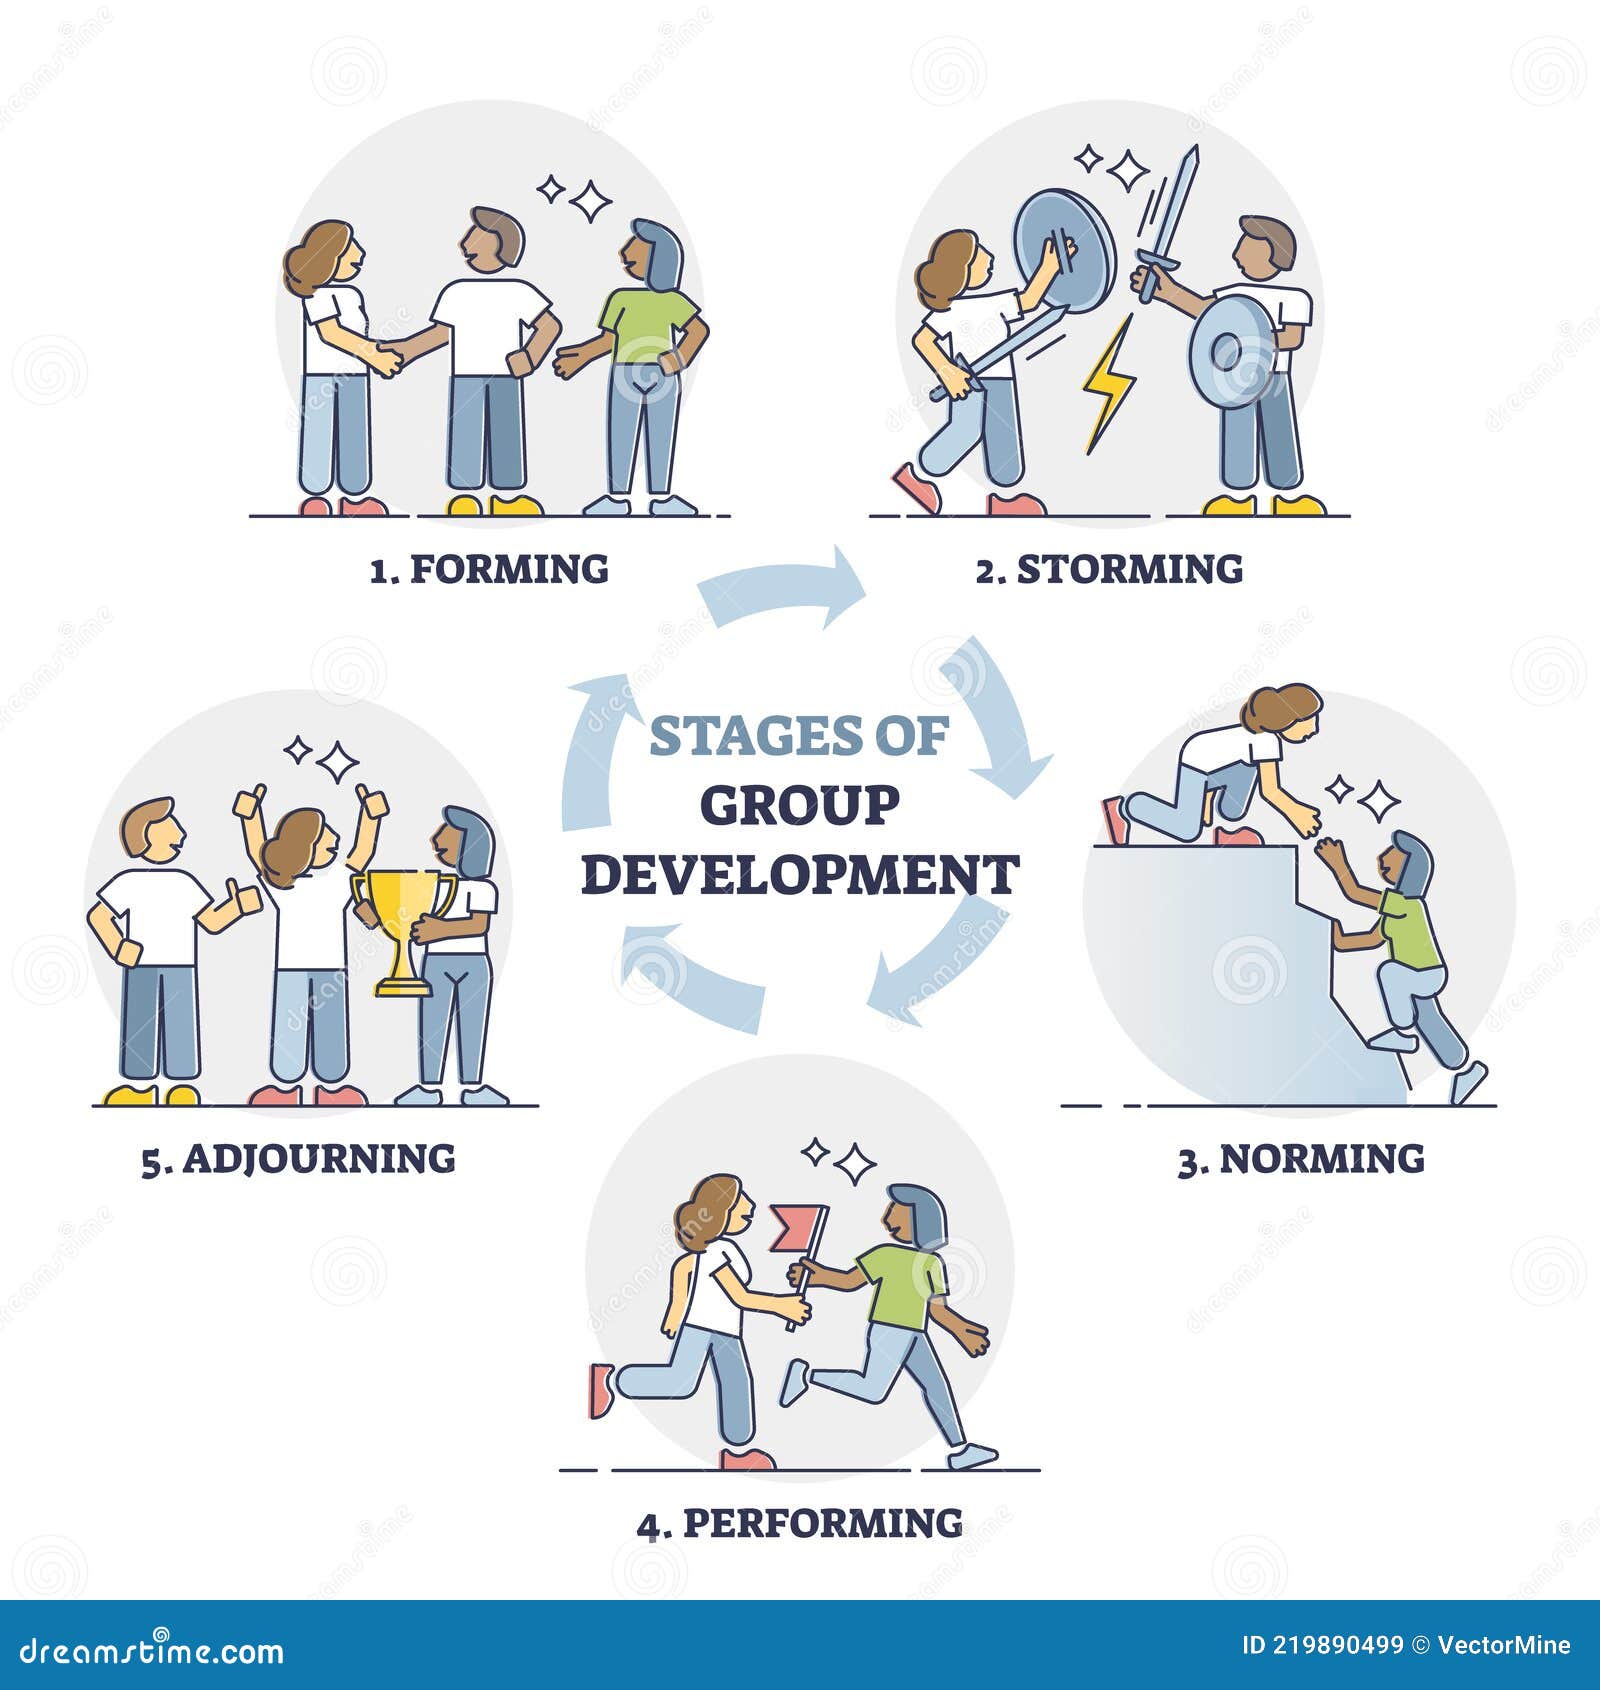 stages of group development with explained team growth steps outline diagram